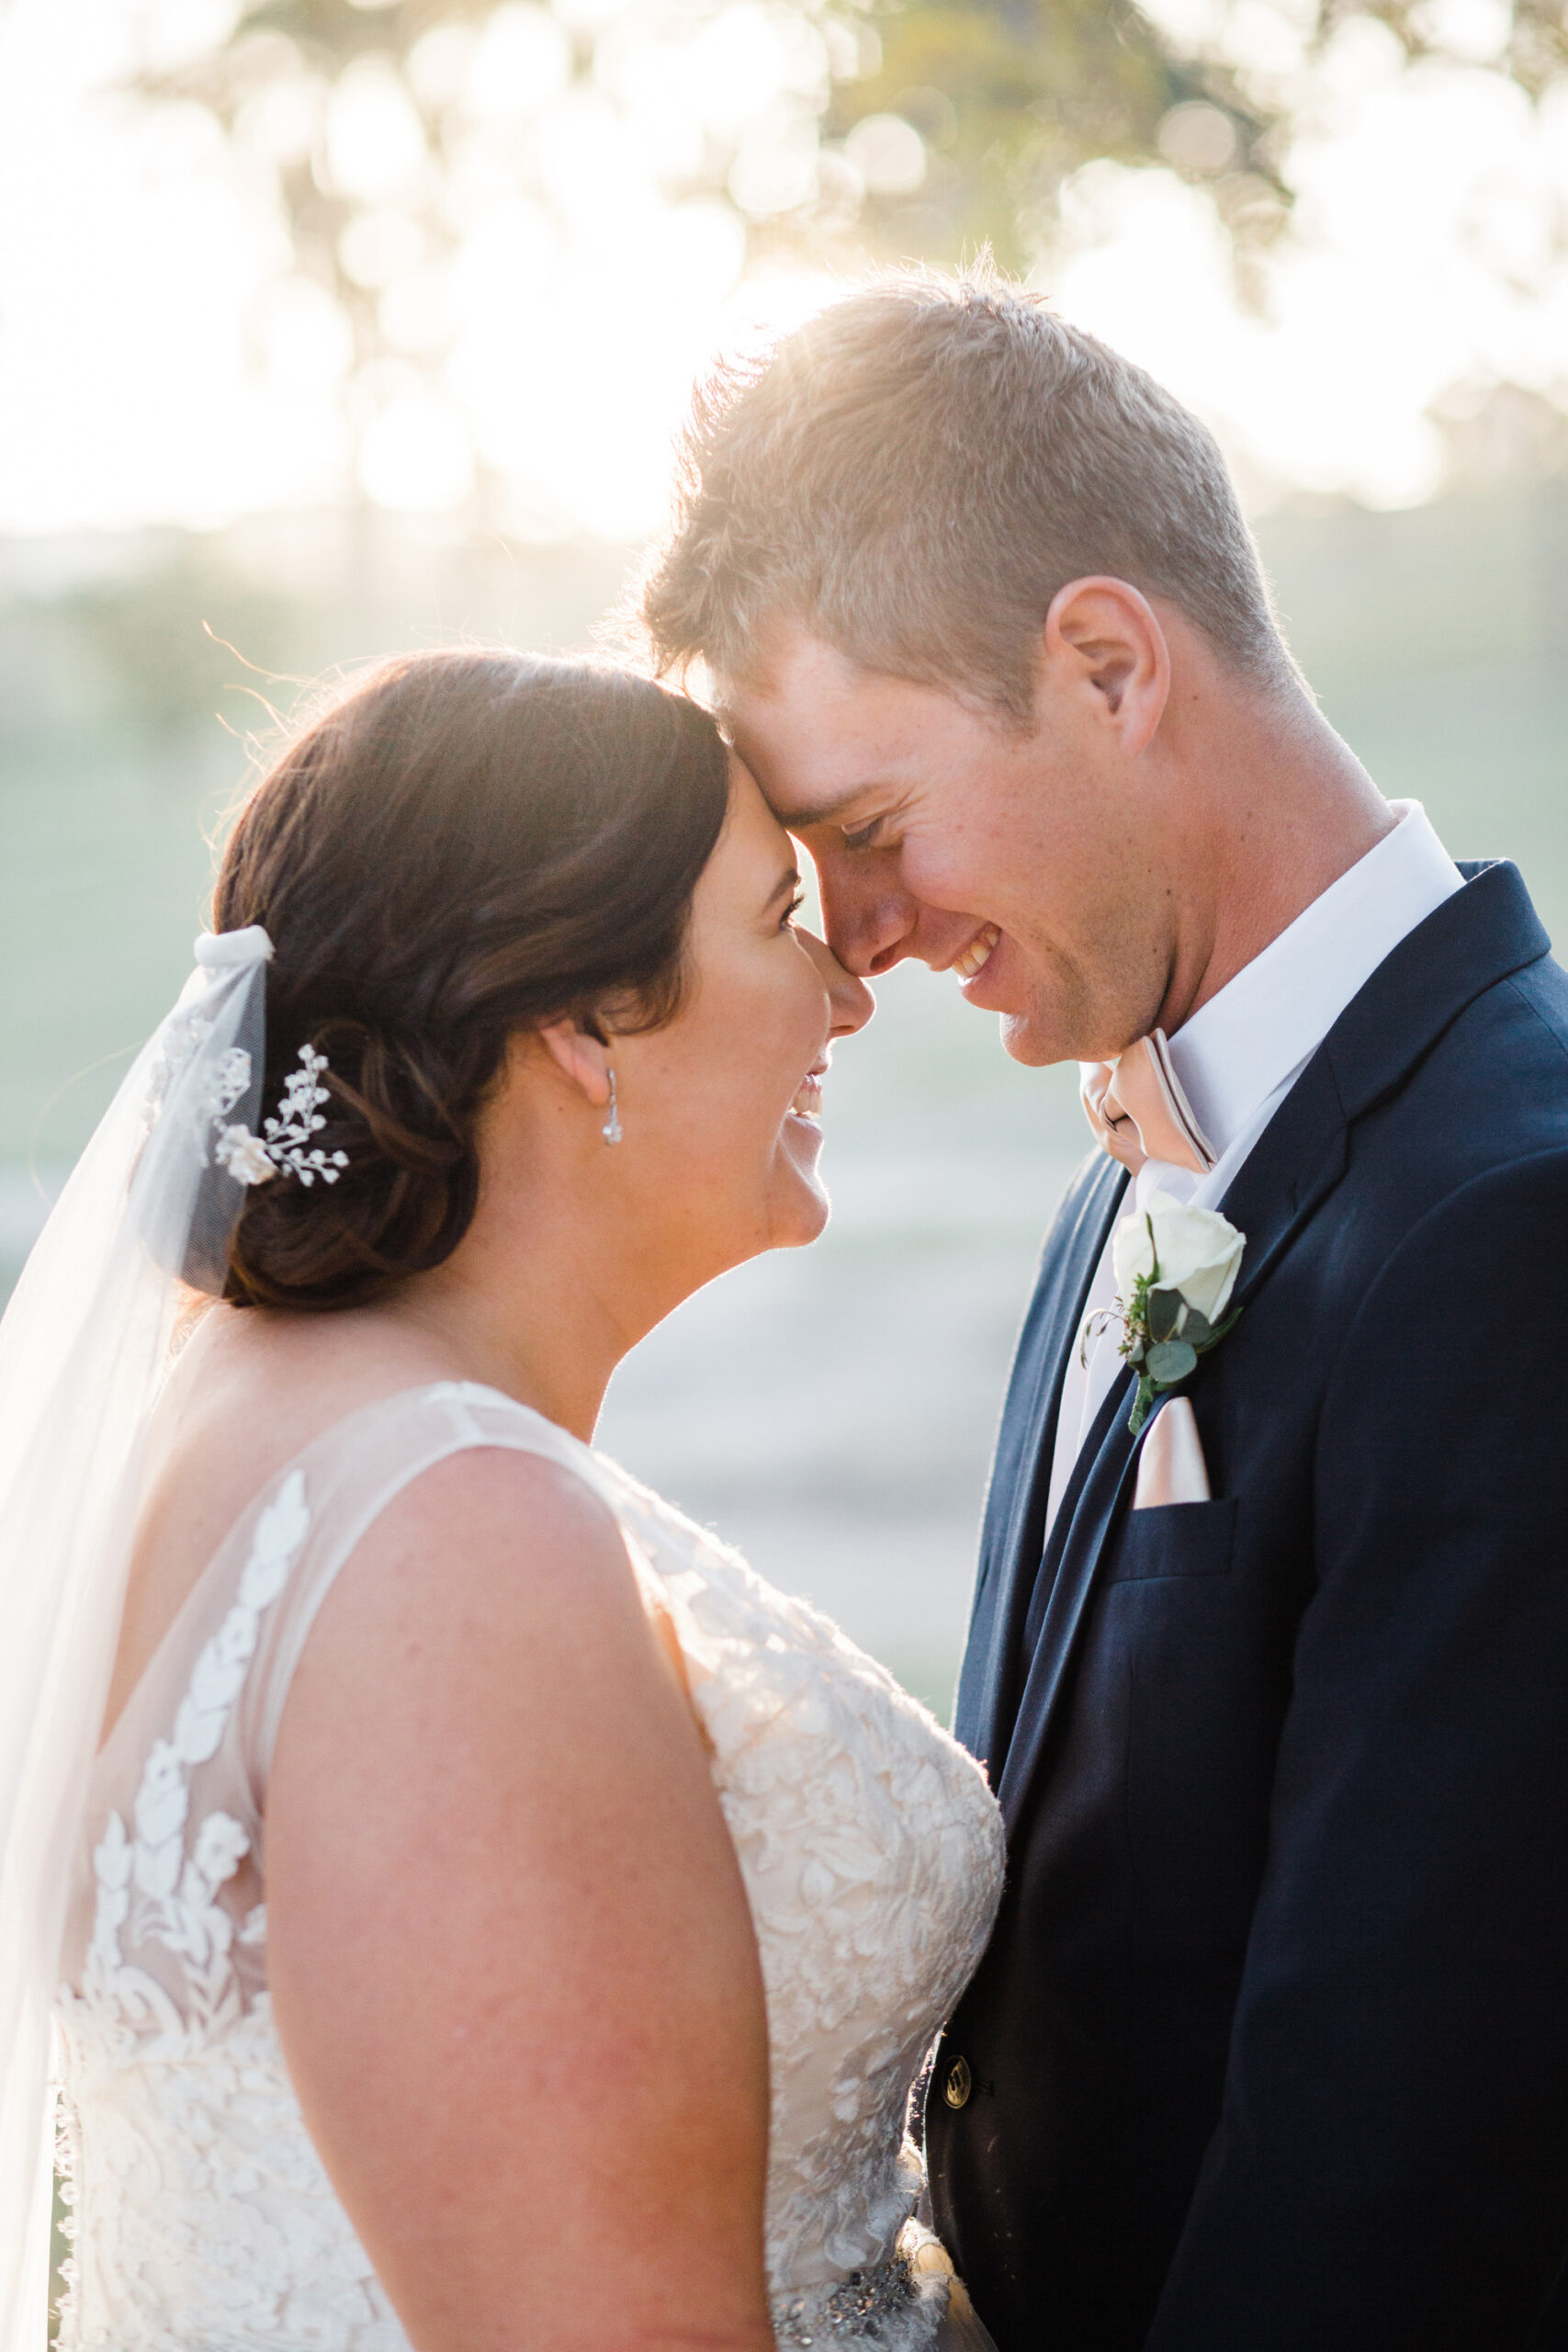 Sophie_Ambrose_Simple-Elegant-Wedding_This-is-Life-Photography_SBS_027